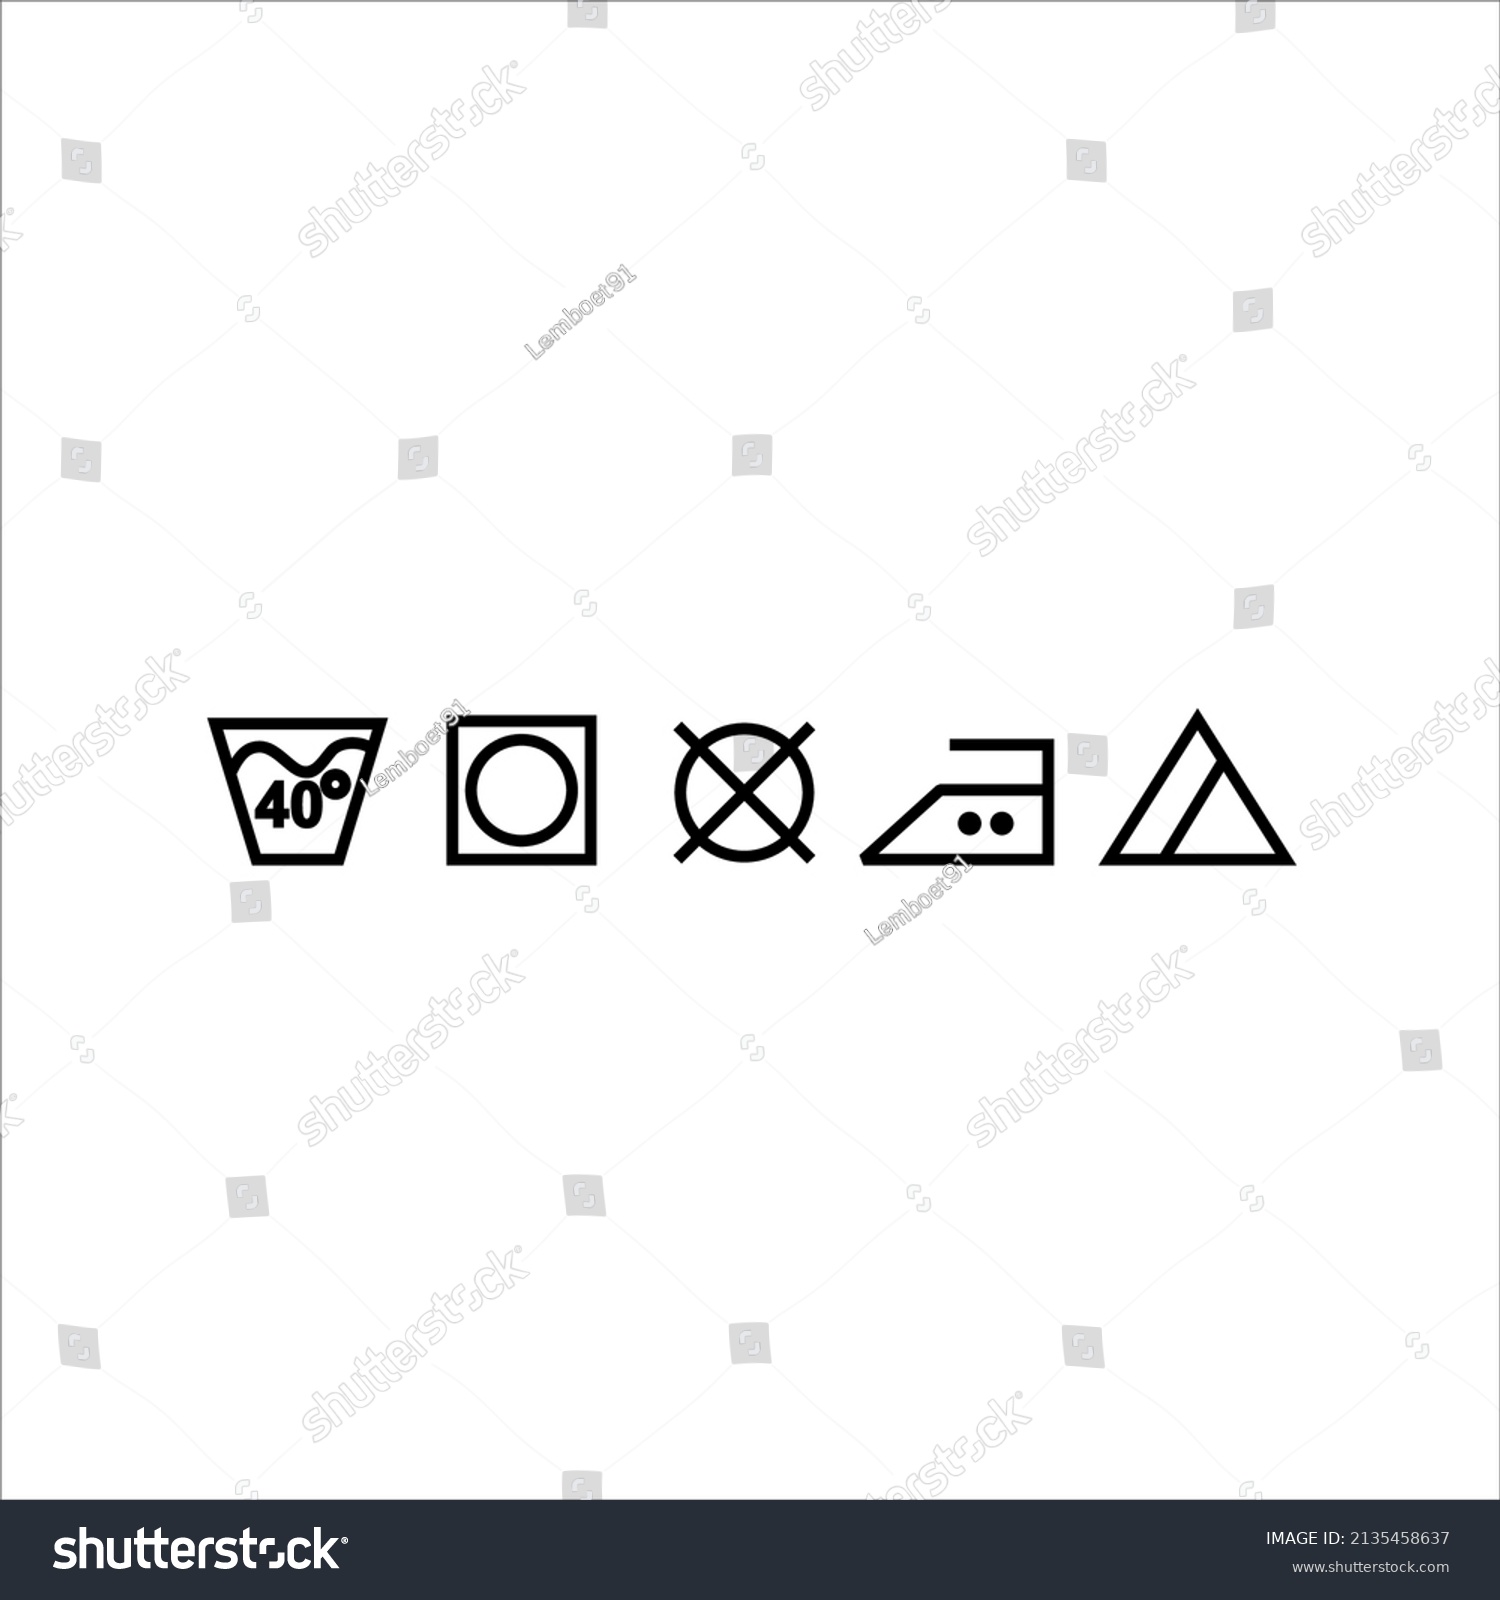 SVG of hangtag icon vector for t-shirt and clothings svg